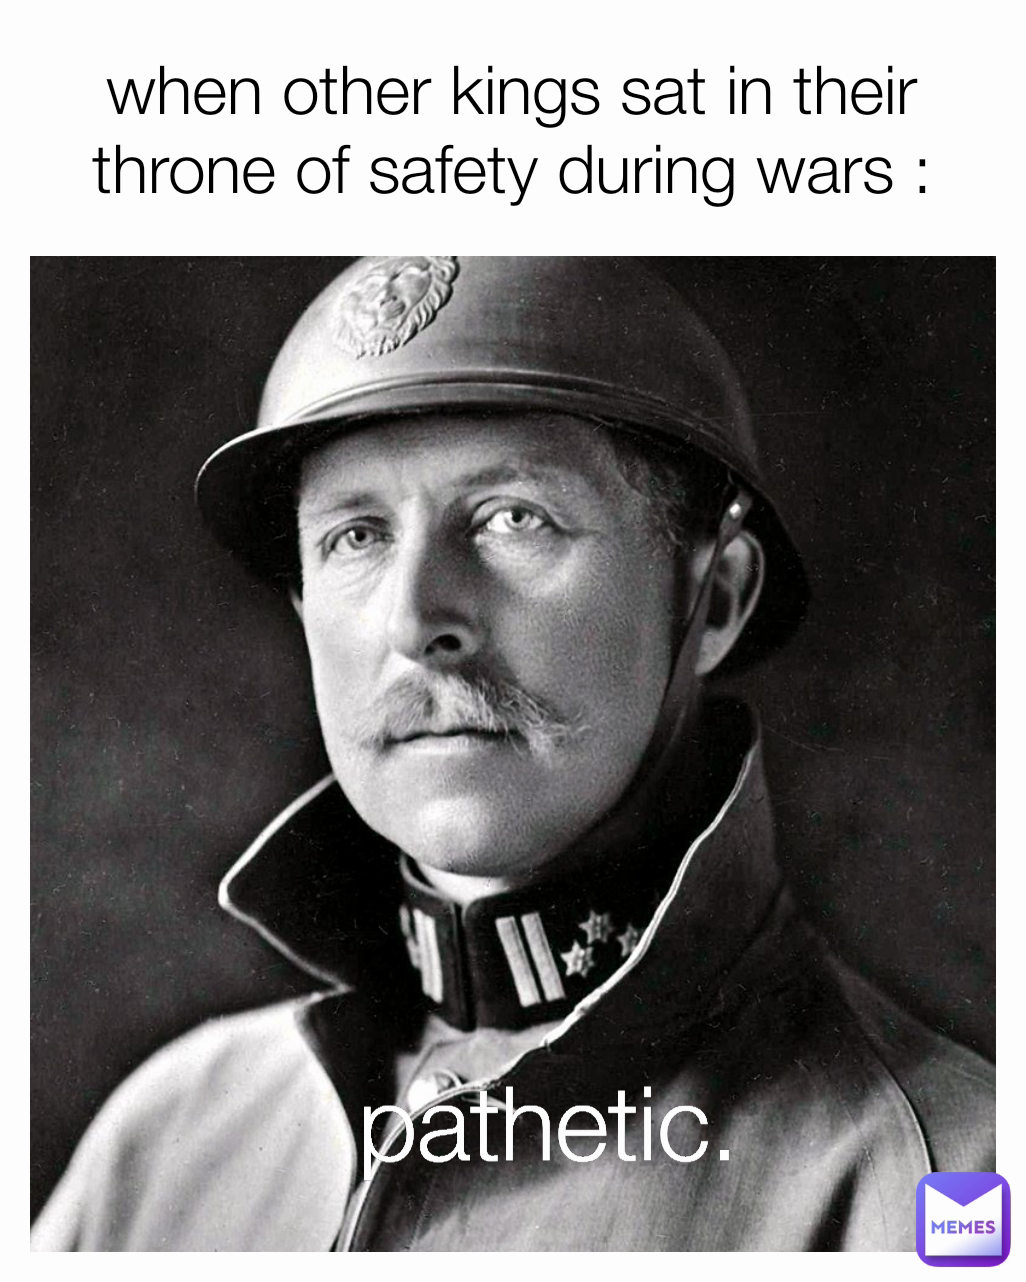 when other kings sat in their throne of safety during wars : pathetic.